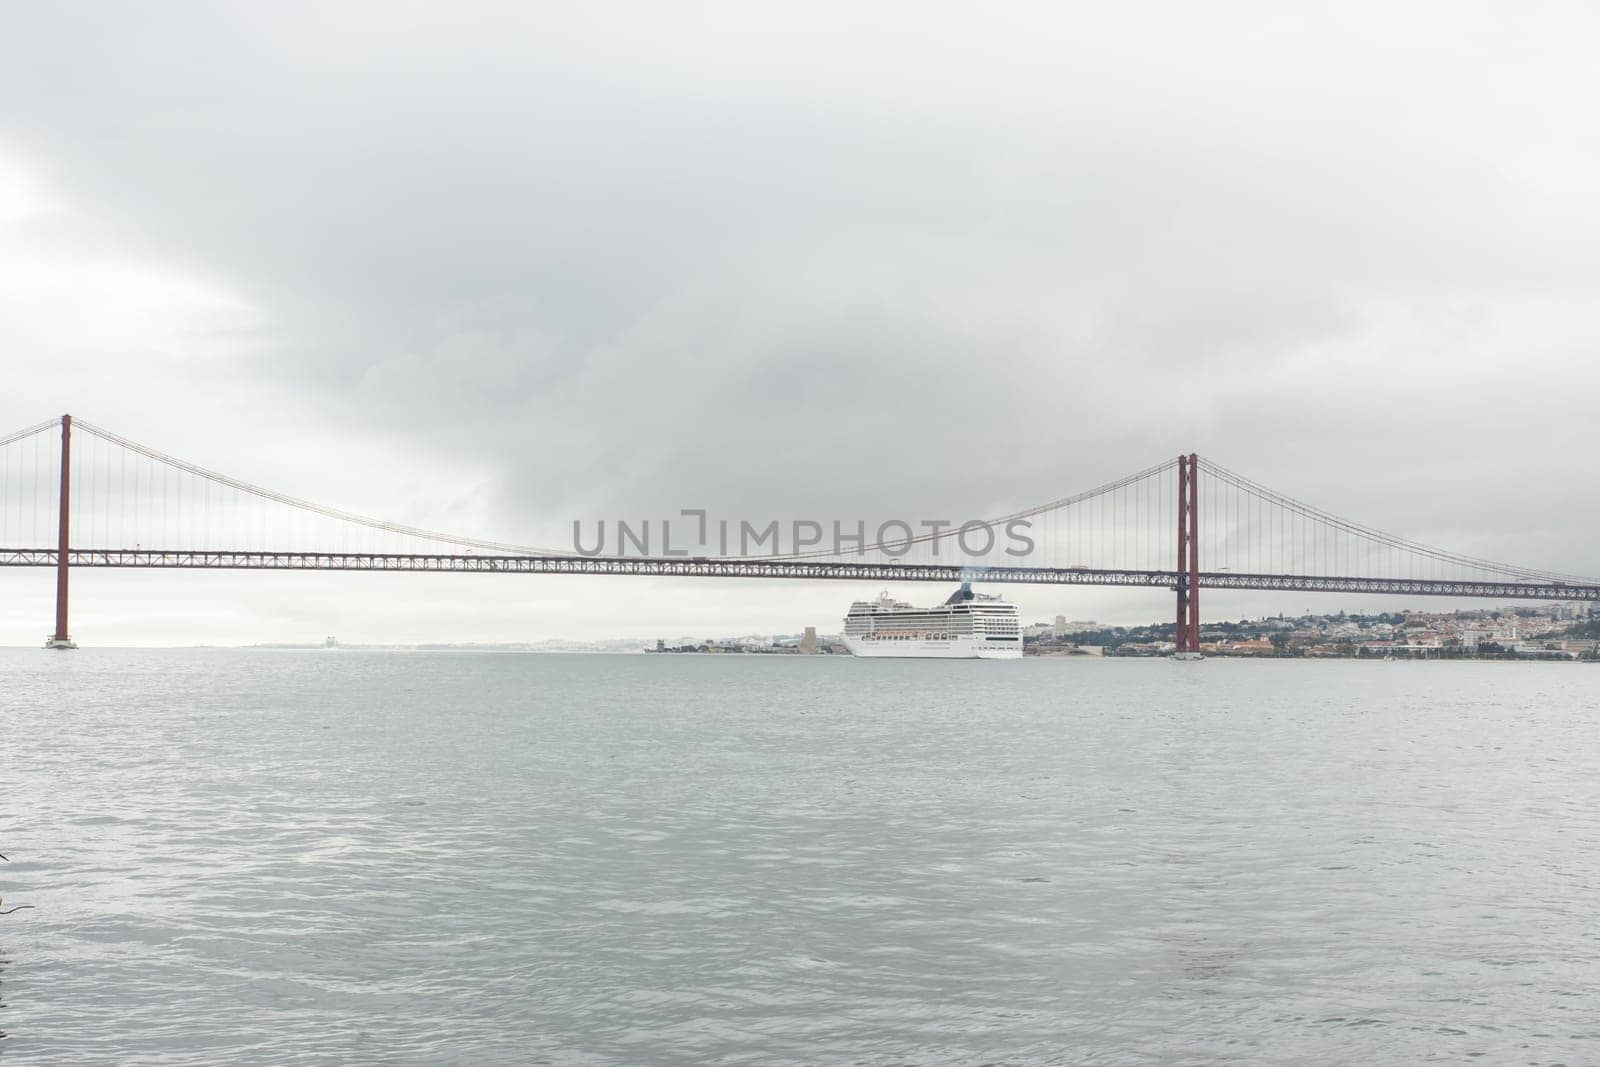 A cruise ship passes along the river under the bridge in cloudy weather by Studia72